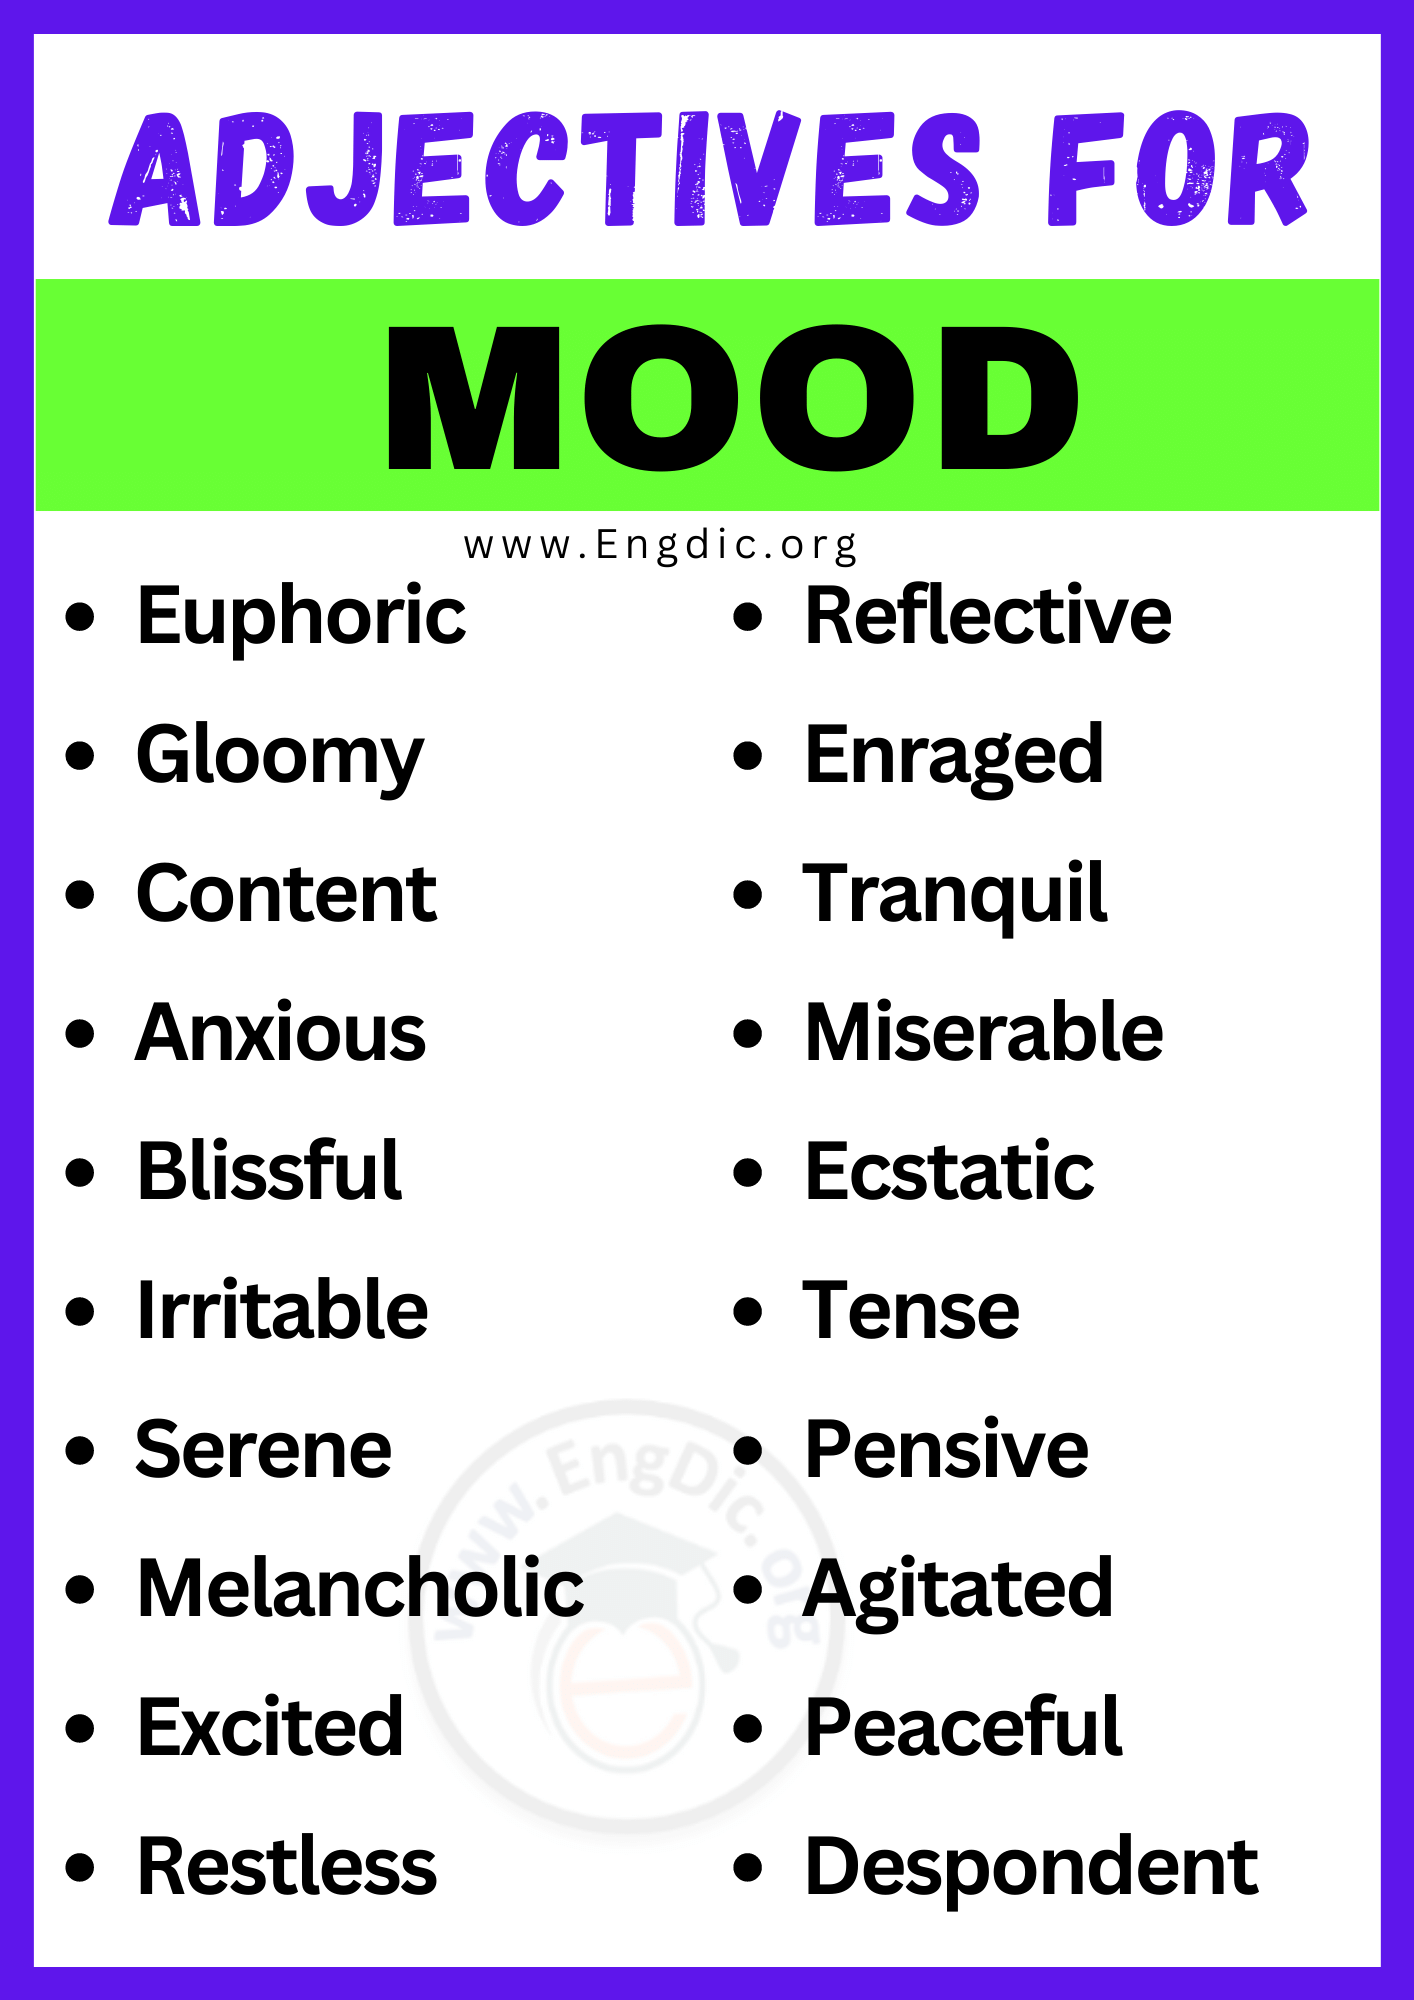 Adjectives for Mood